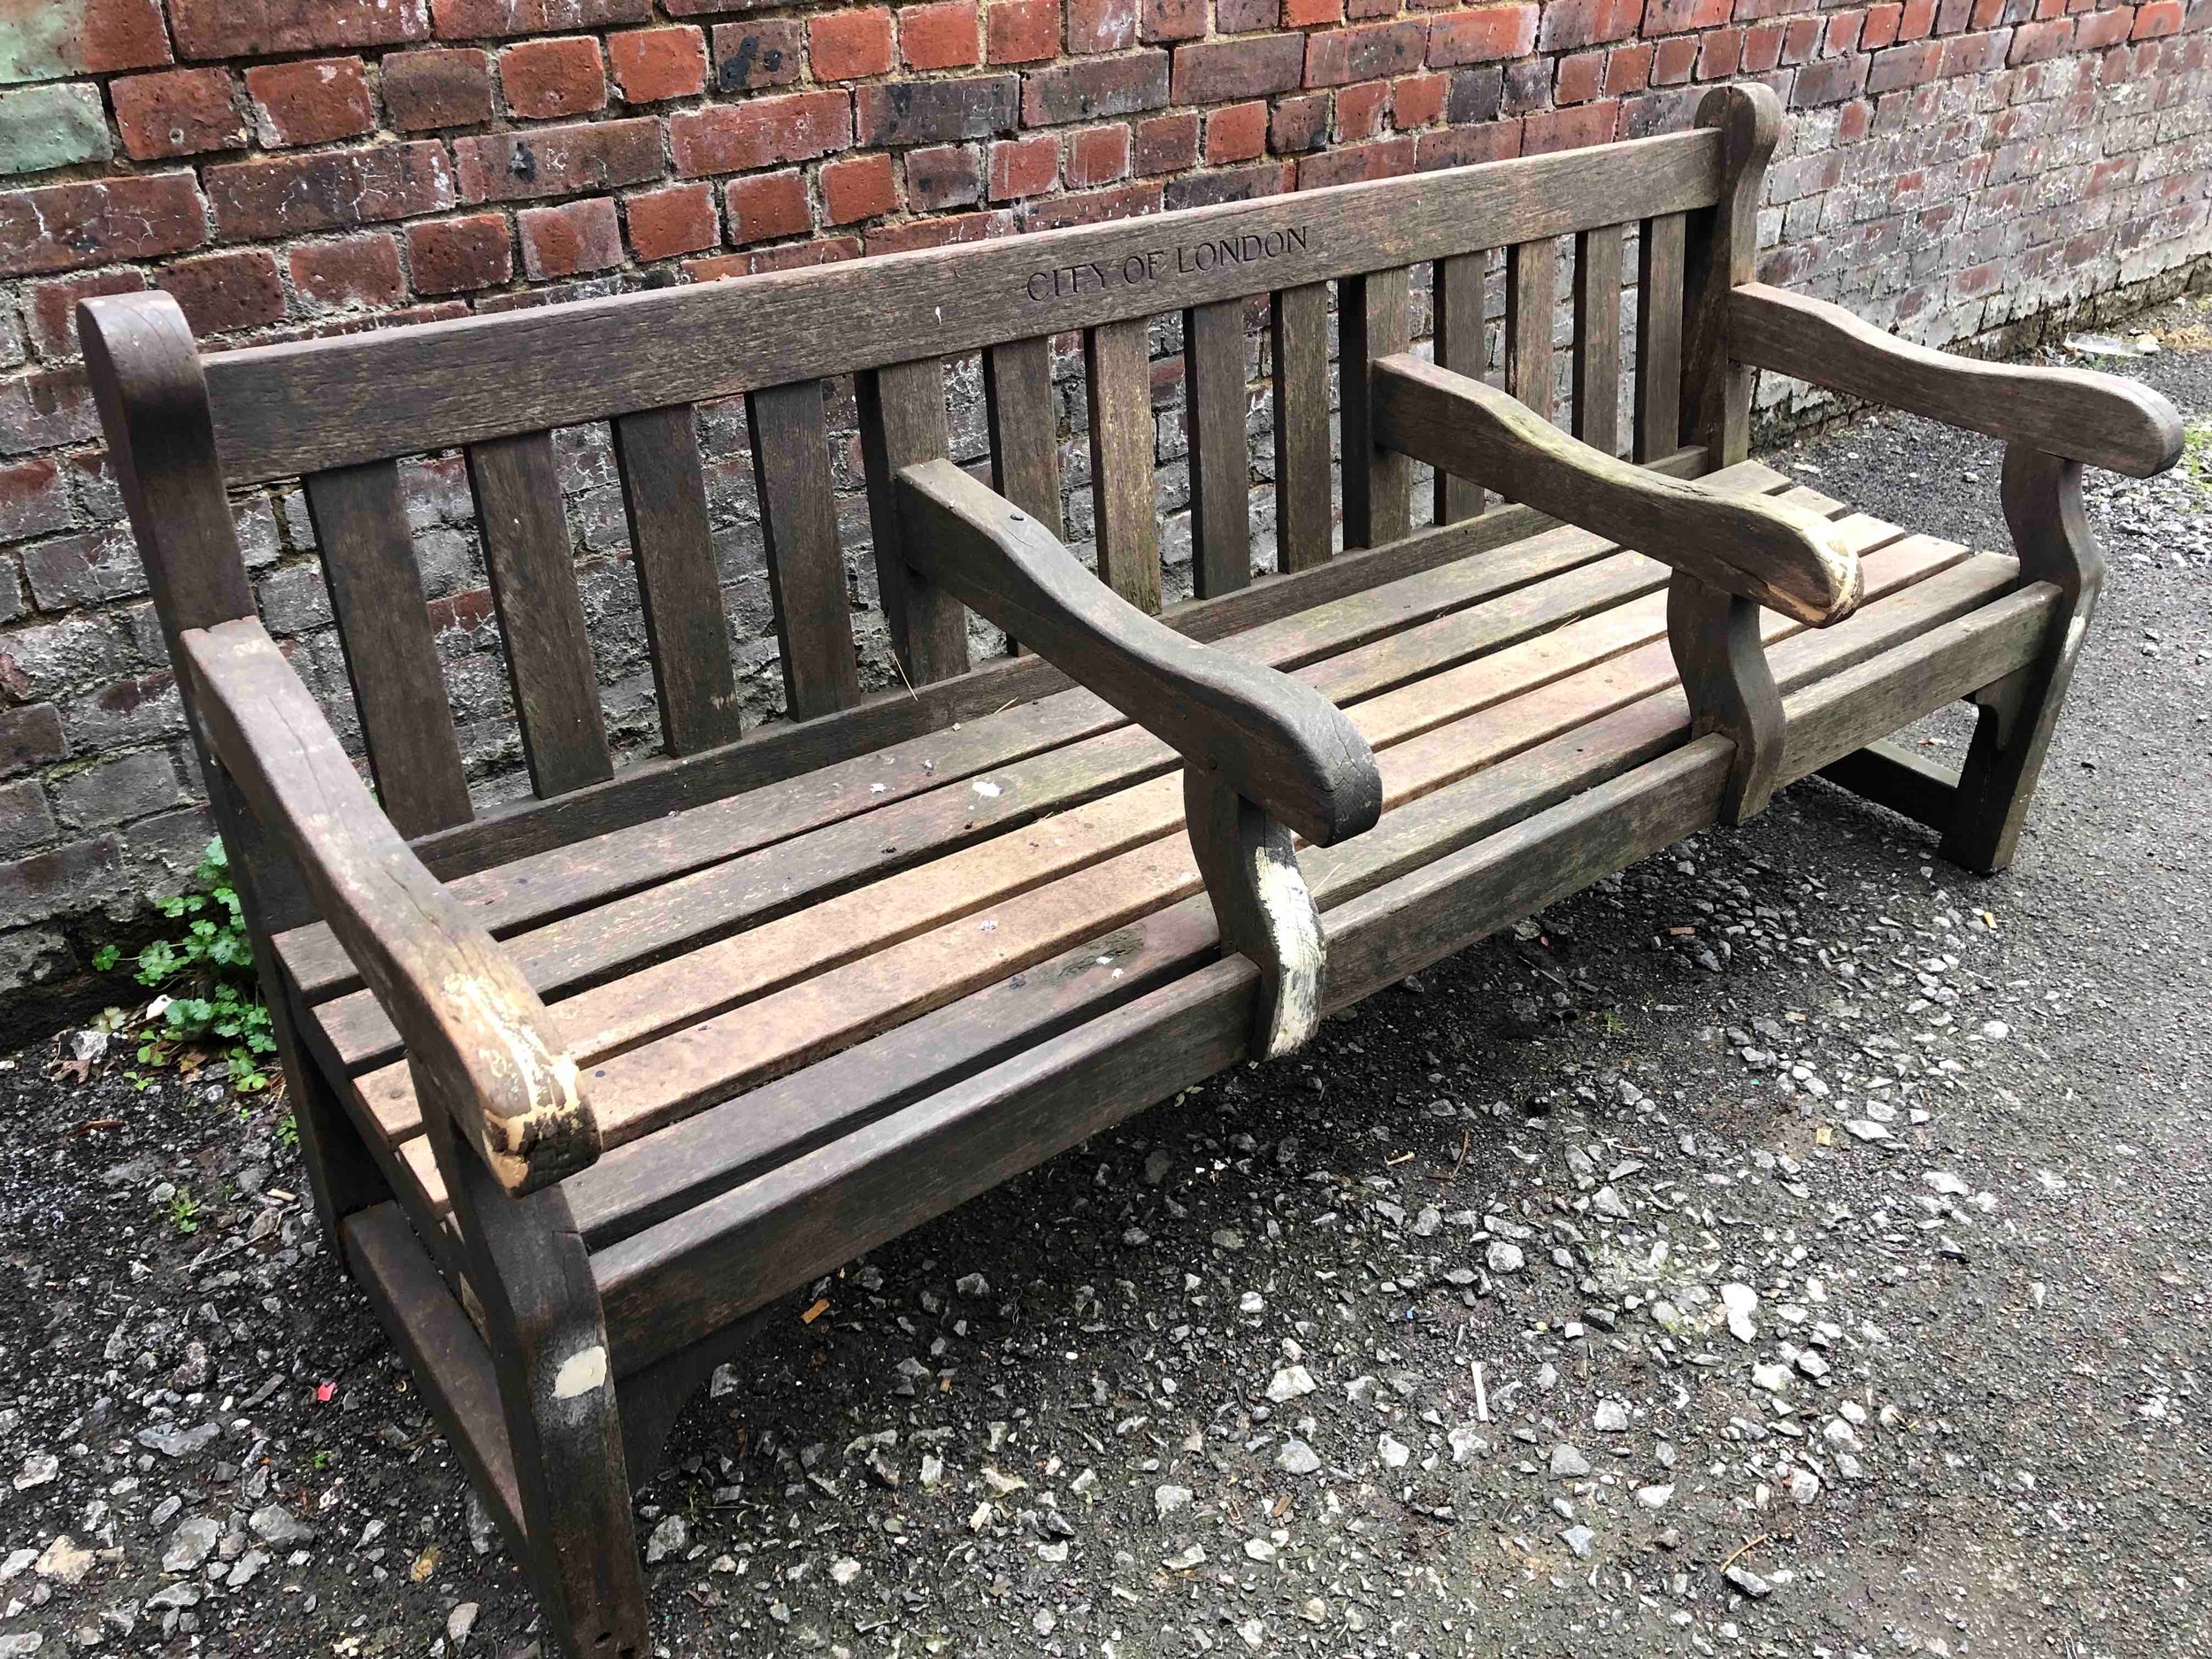 City of London vintage park bench seats in weathered teak. H.87 W.196 D.73cm. - Image 2 of 4